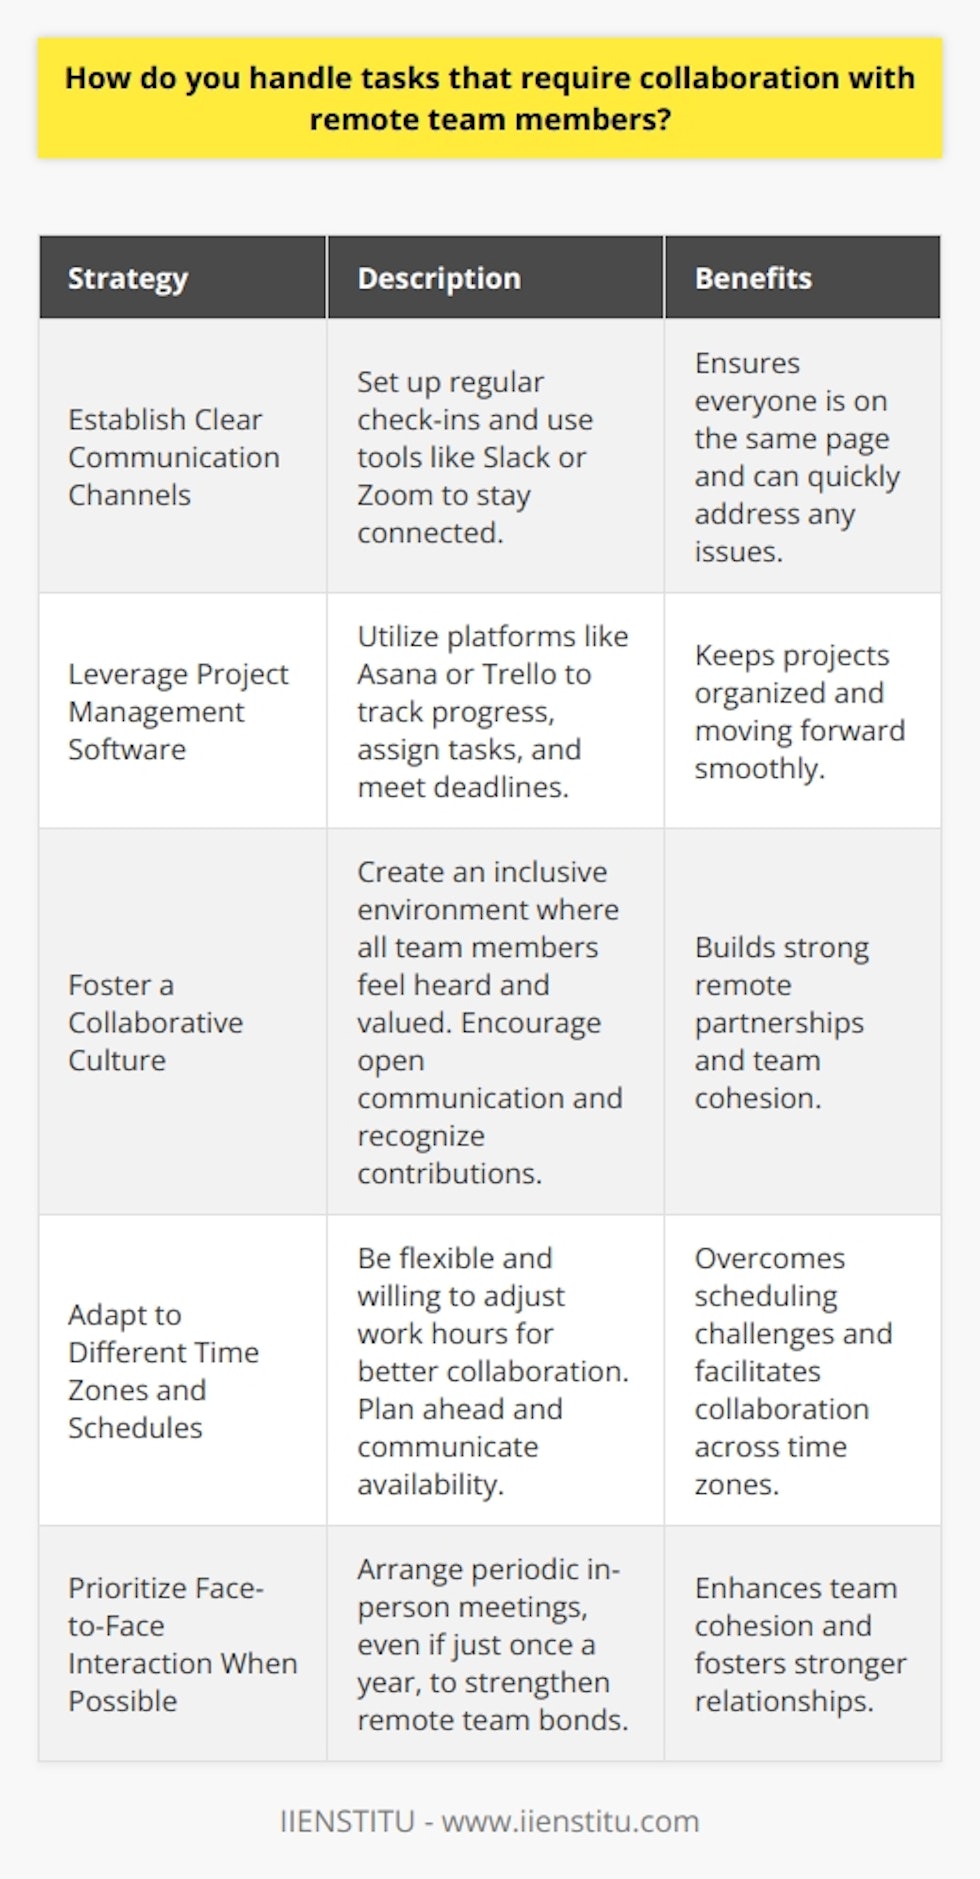 I have extensive experience collaborating with remote team members to successfully complete projects. Here are some strategies I employ: Establish Clear Communication Channels I believe in setting up regular check-ins and using tools like Slack or Zoom to stay connected. This helps ensure everyone is on the same page and can quickly address any issues that arise. Leverage Project Management Software Utilizing platforms like Asana or Trello allows remote teams to track progress, assign tasks, and meet deadlines. I find these invaluable for keeping projects organized and moving forward smoothly. Foster a Collaborative Culture I strive to create an inclusive environment where all team members feel heard and valued. Encouraging open communication, actively seeking input, and recognizing contributions goes a long way in building strong remote partnerships. Adapt to Different Time Zones and Schedules When working across time zones, Im flexible and willing to occasionally adjust my hours for better collaboration. Planning ahead and clearly communicating availability is key to overcoming scheduling challenges. Prioritize Face-to-Face Interaction When Possible While not always feasible, I find that periodic in-person meetings, even if just once a year, significantly strengthen remote team bonds and cohesion. Theres no true substitute for face-to-face interaction! At the end of the day, successful remote collaboration comes down to clear communication, mutual respect, and a shared commitment to achieving goals. Im confident my skills and approach would allow me to thrive in this role.